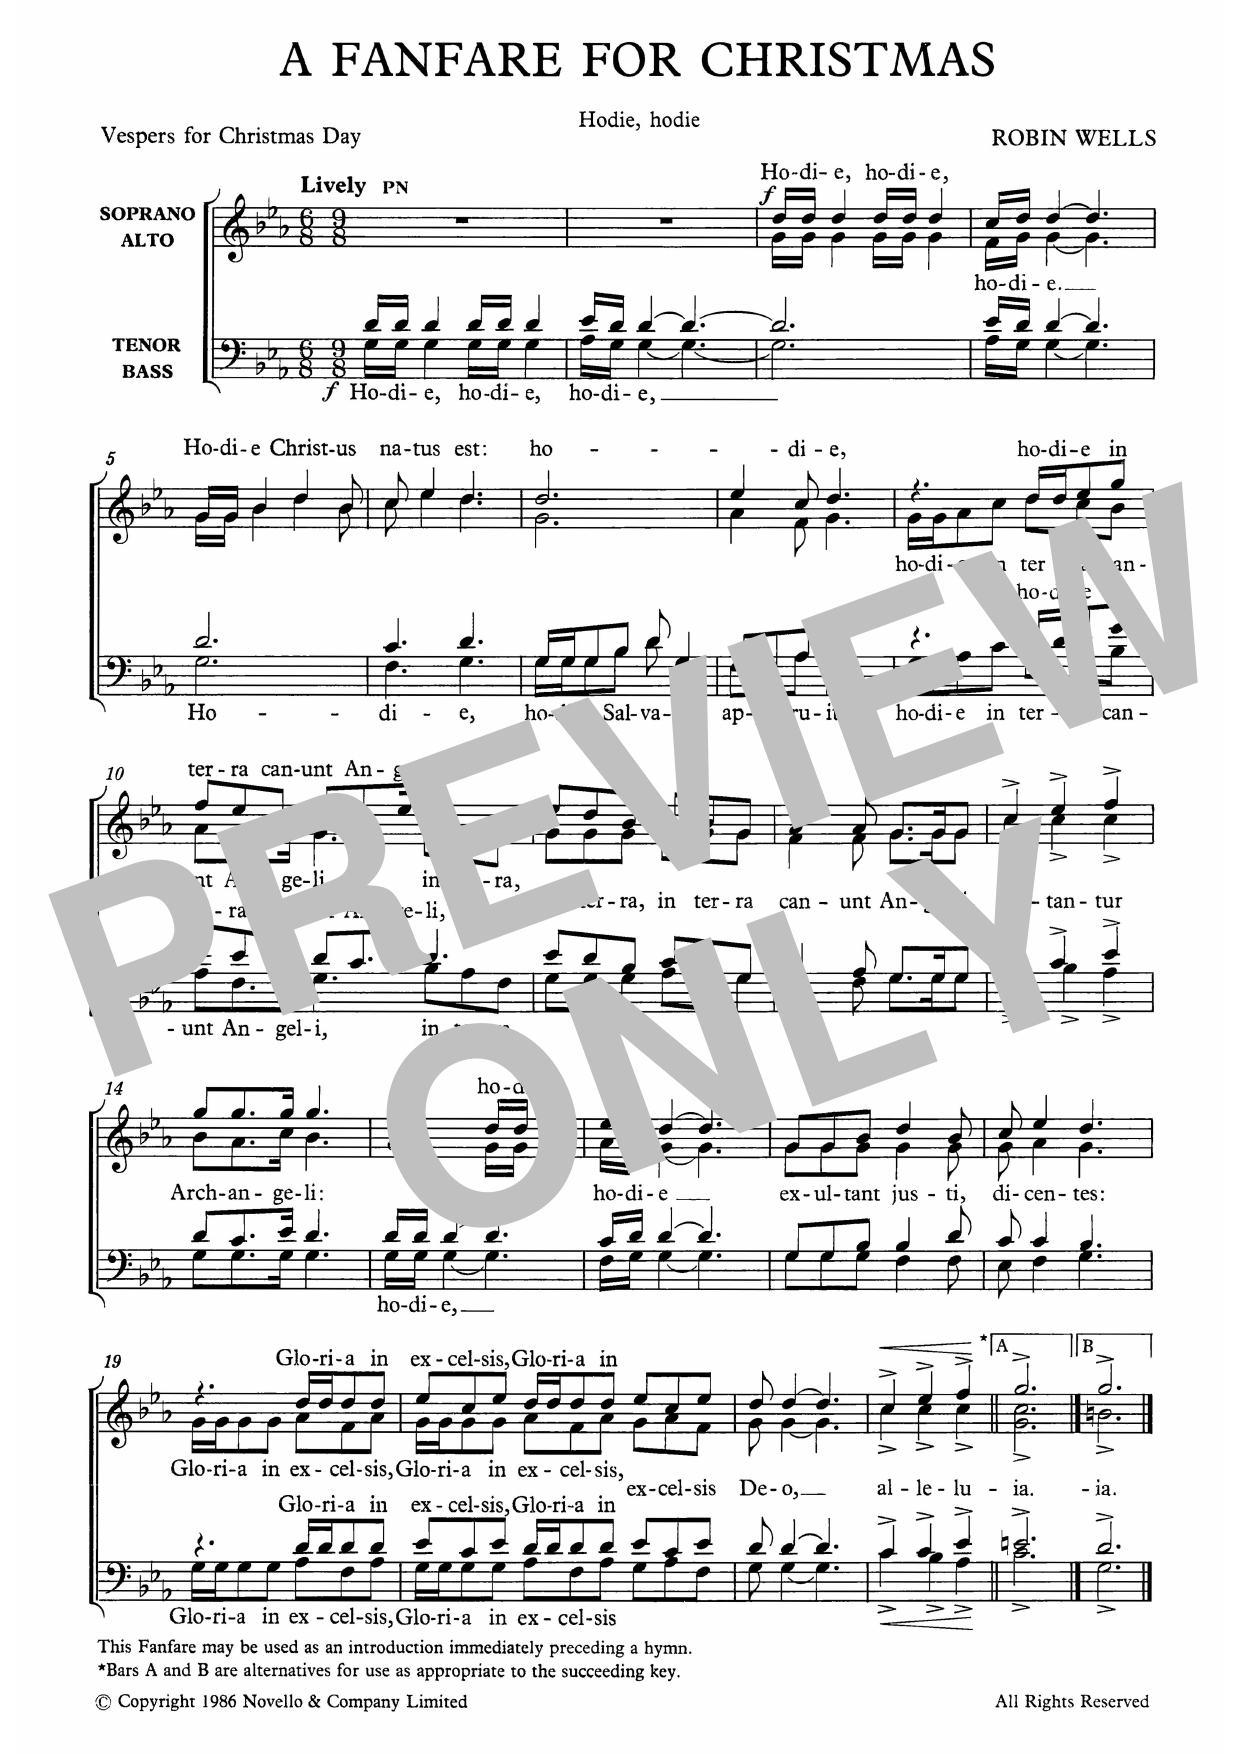 Download Robin Wells A Fanfare For Christmas Sheet Music